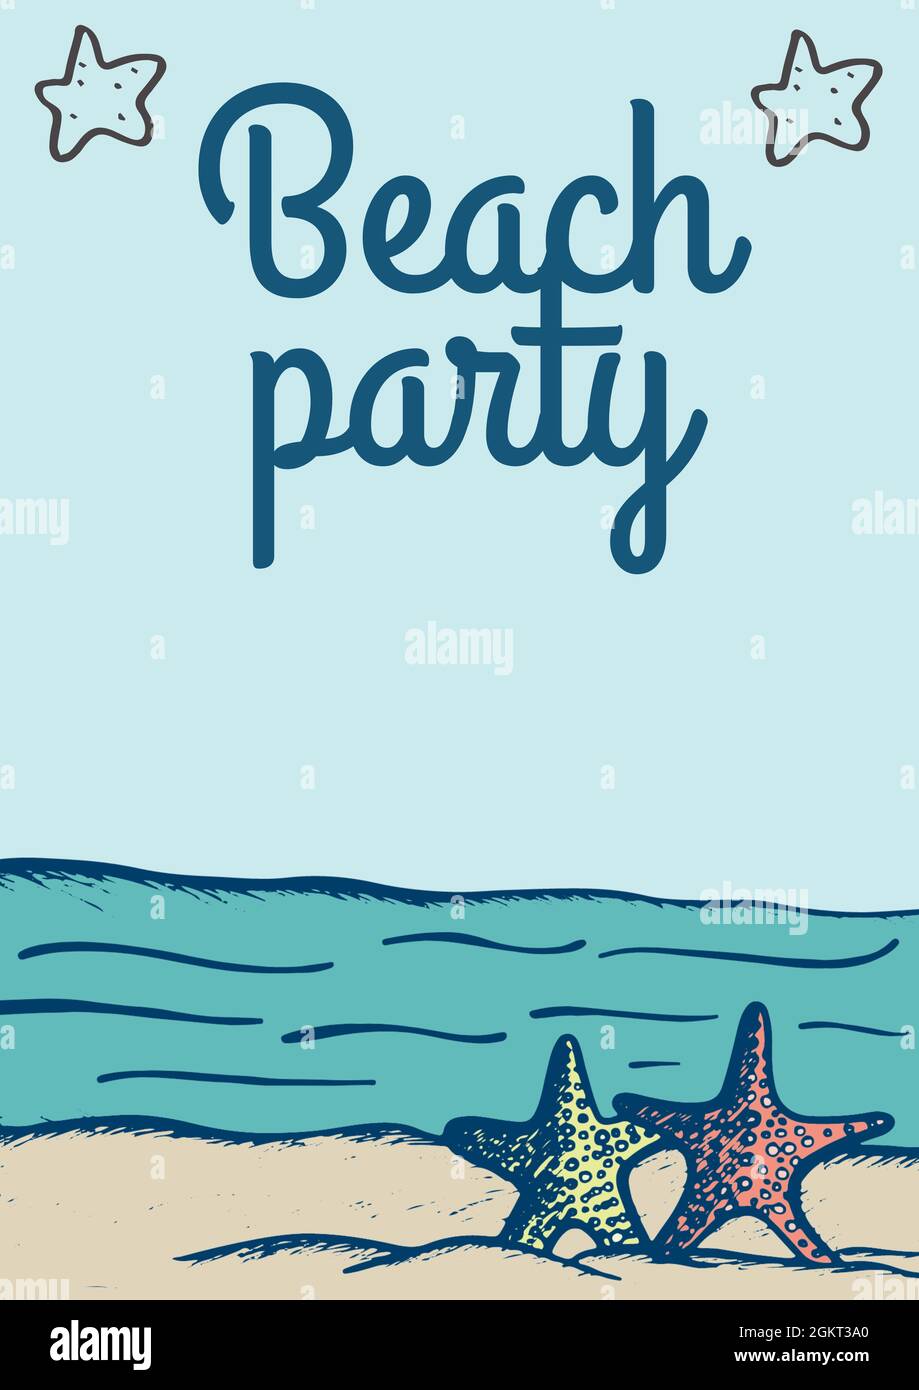 Digitally generated image of beach party text over star fish icon on the beach Stock Photo